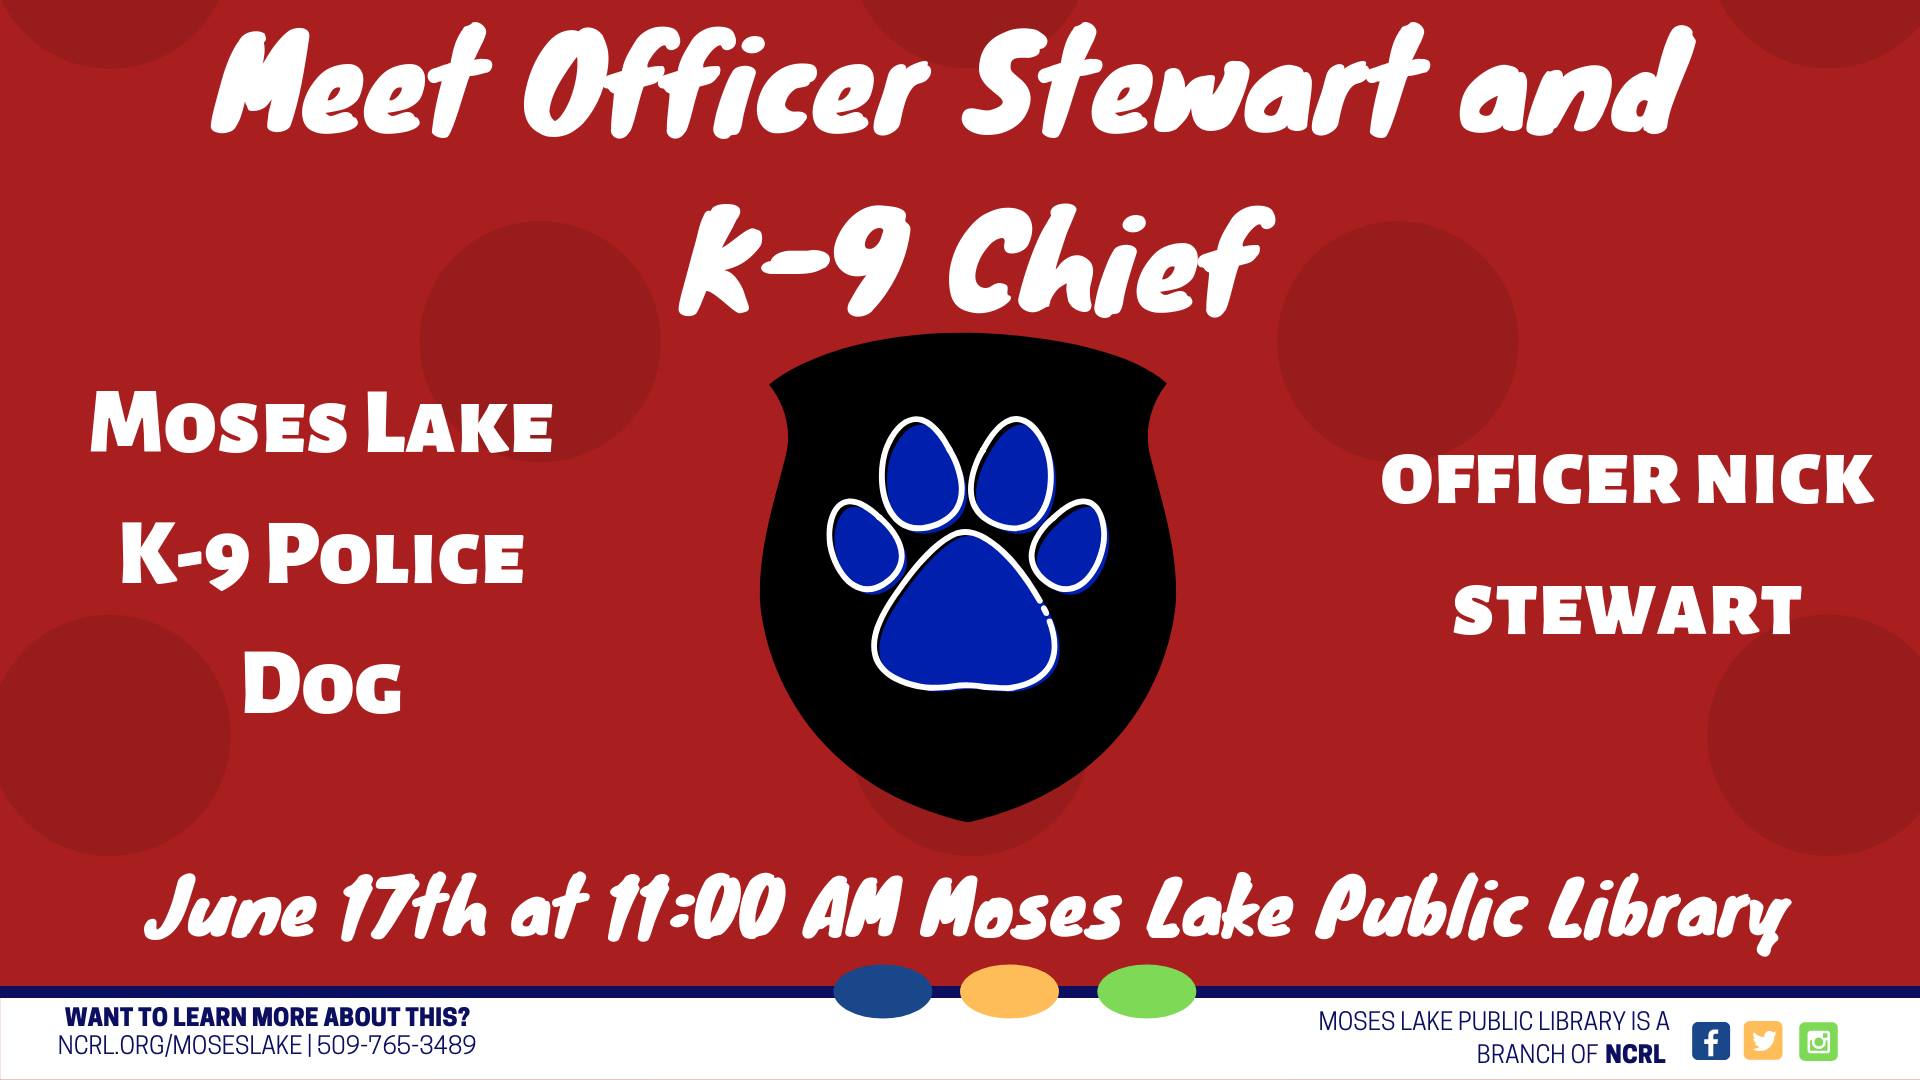 <h1 class="tribe-events-single-event-title">Meet Officer Stewart and K9 Chief</h1>